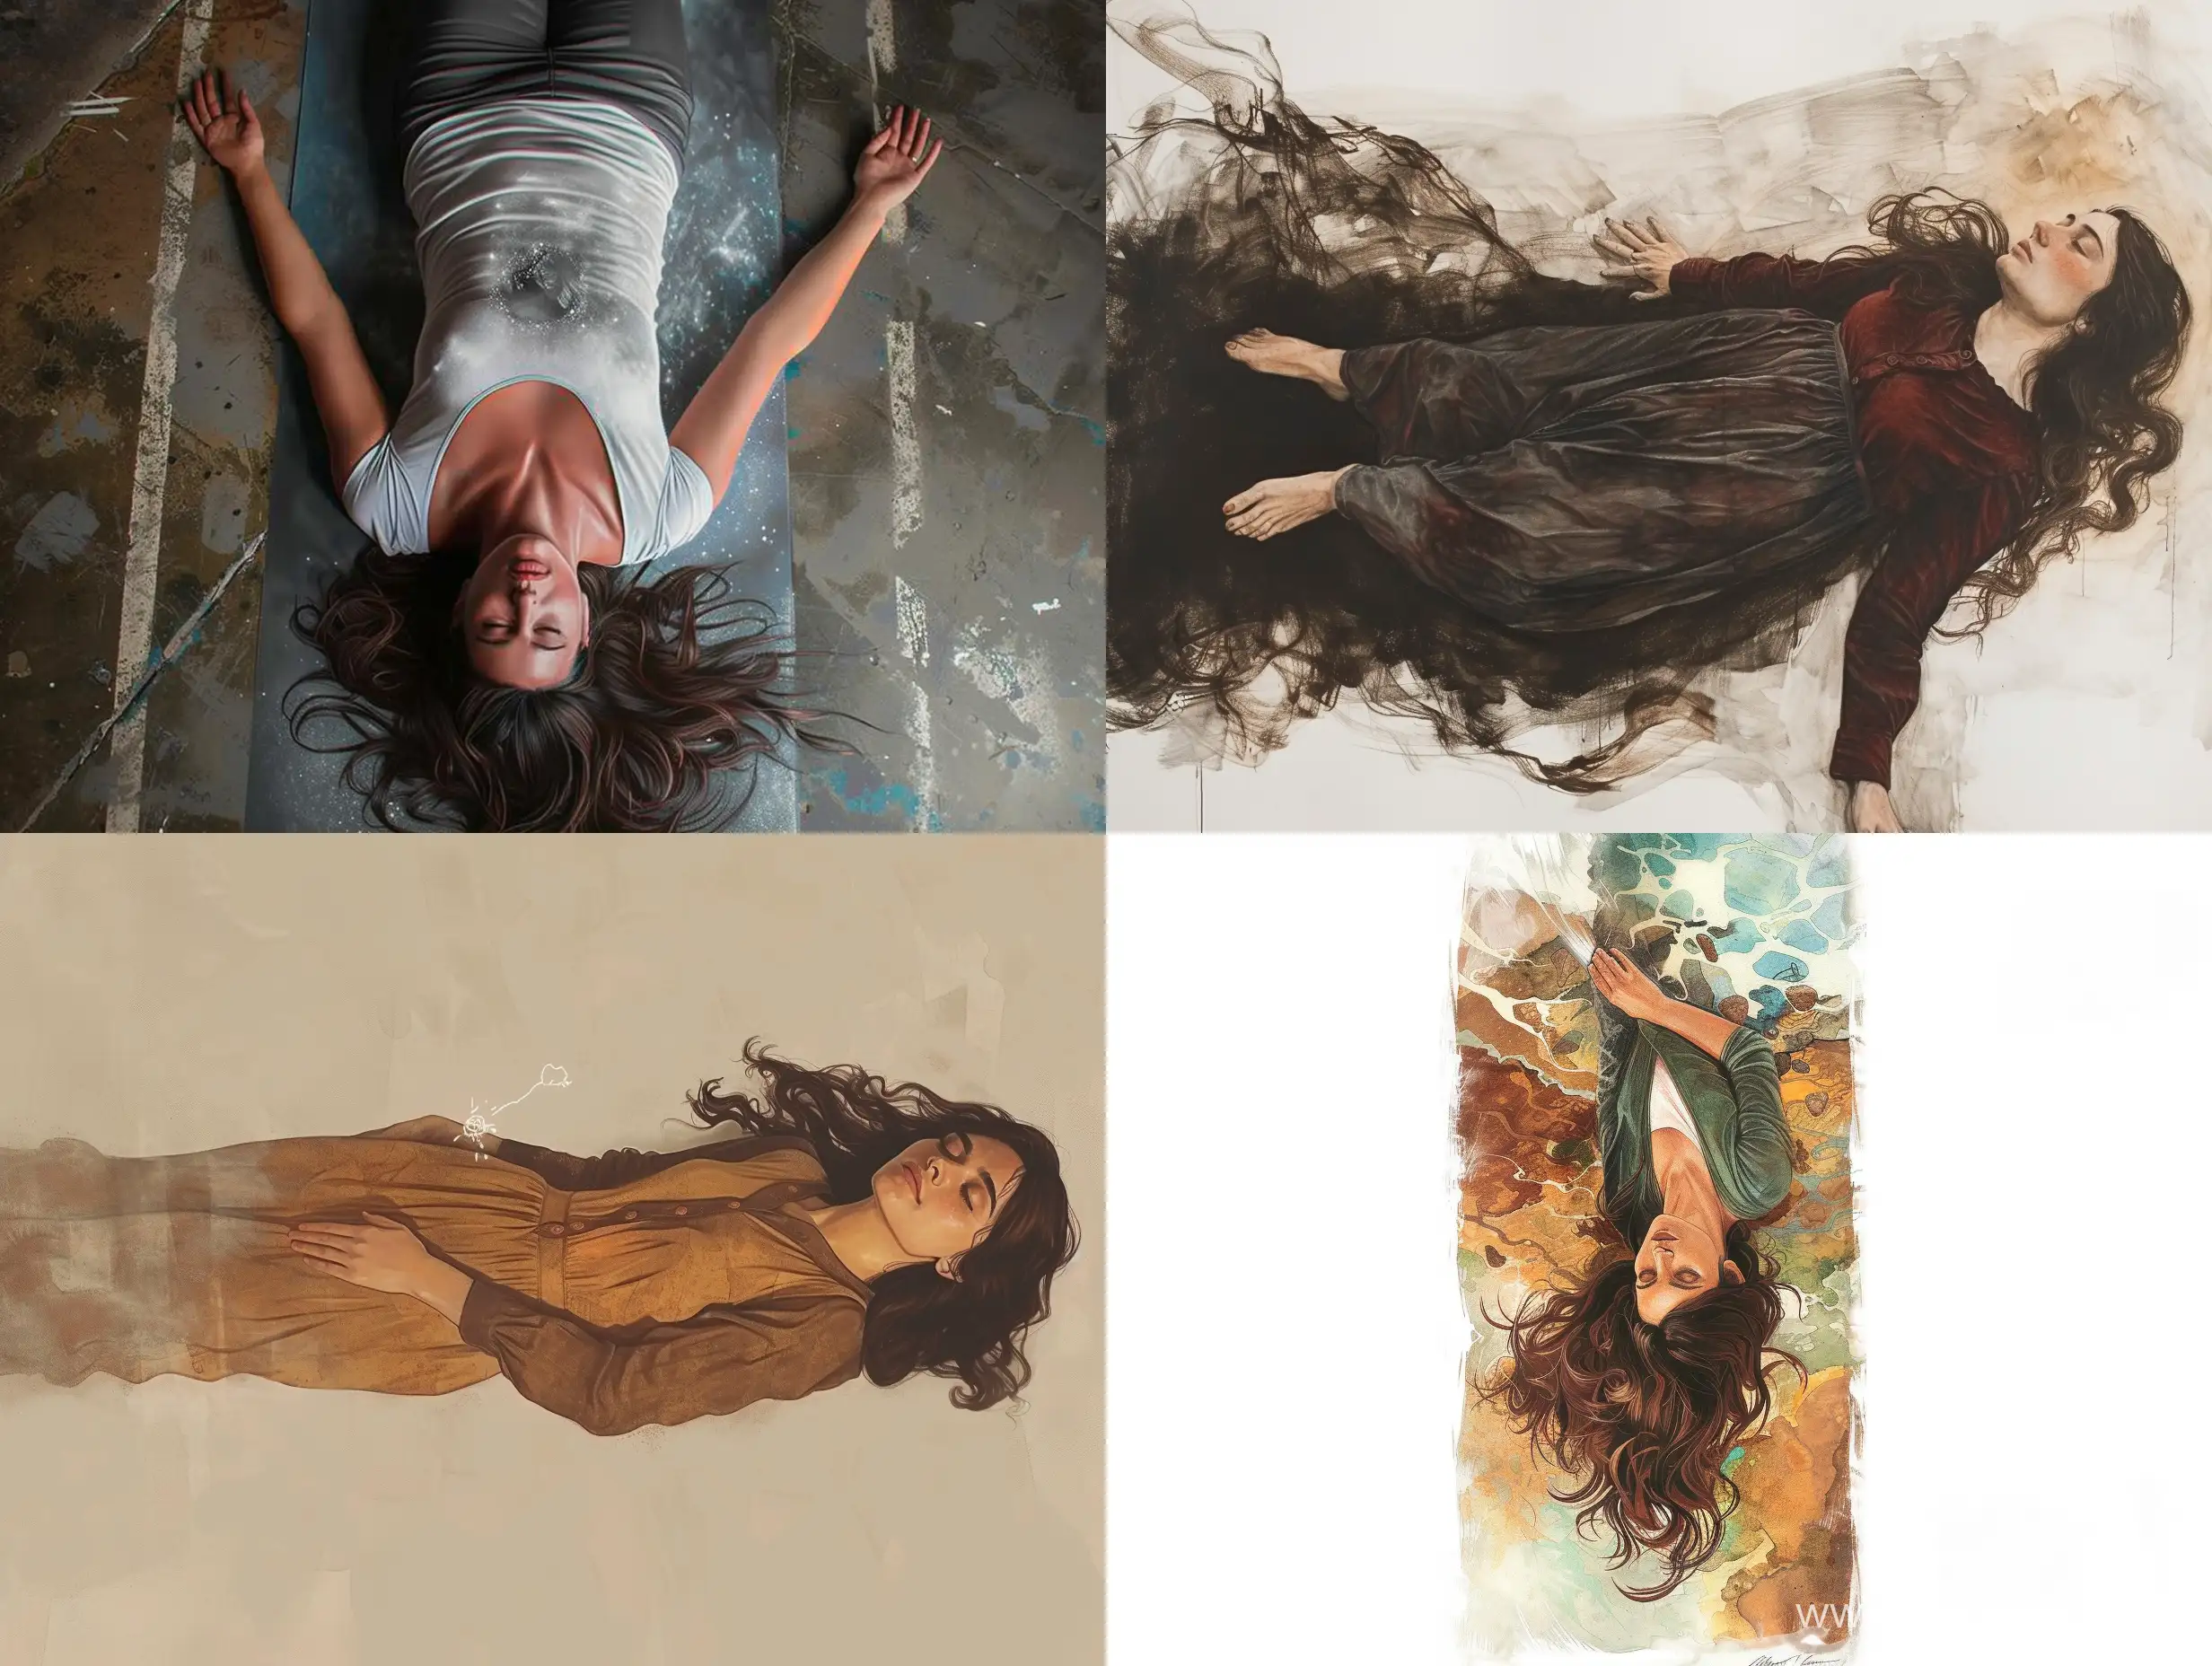 Brunette-Woman-Lying-on-Ground-with-Ethereal-Spirit-Ascending